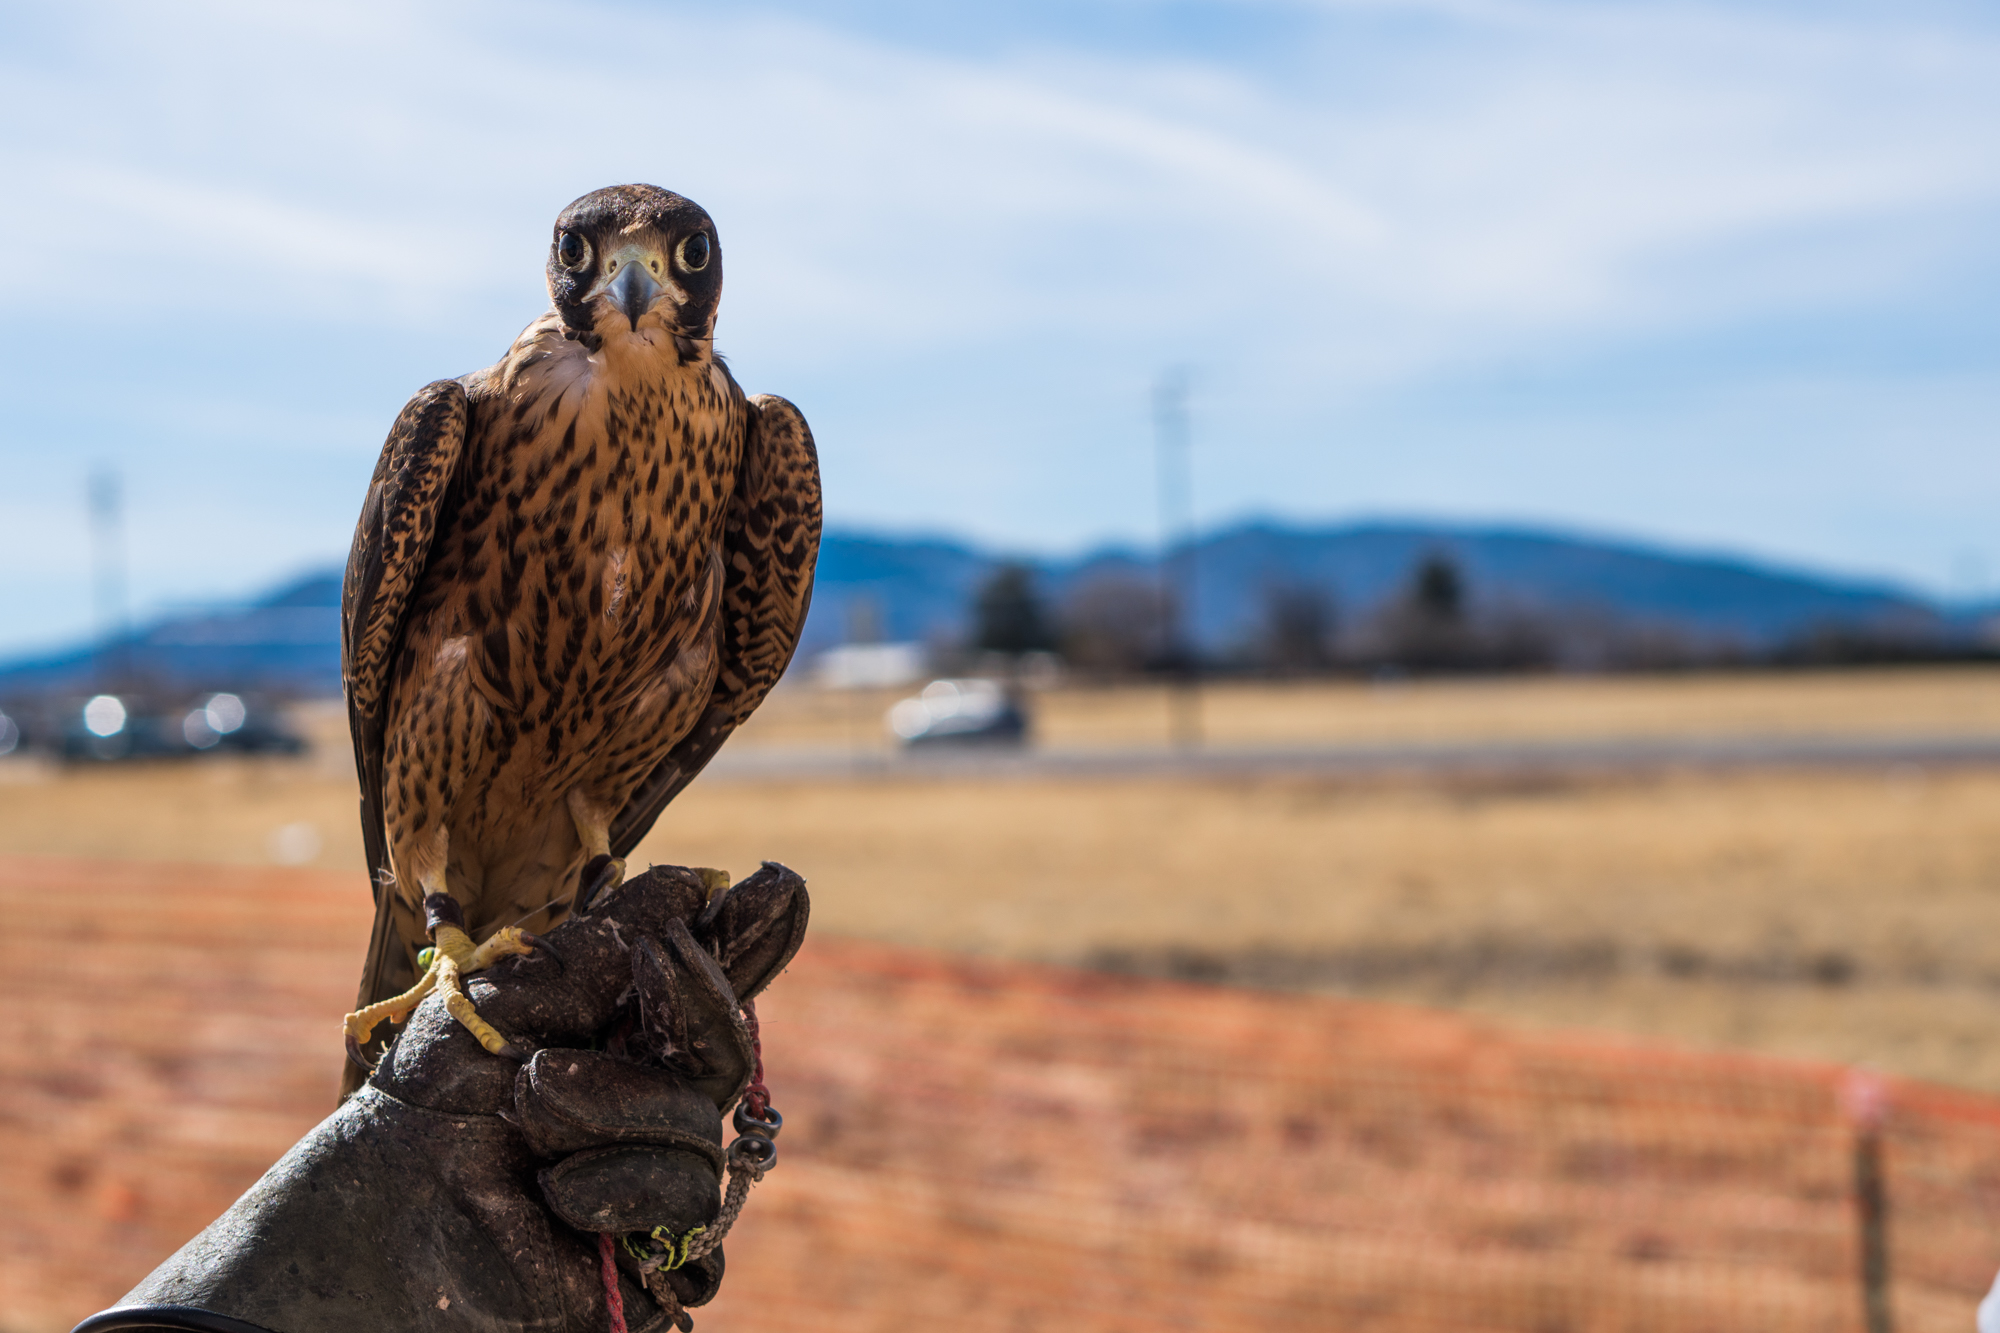 Soaring beauty: Arizona falconry takes flight in effort to promote conservation | The ...2000 x 1333